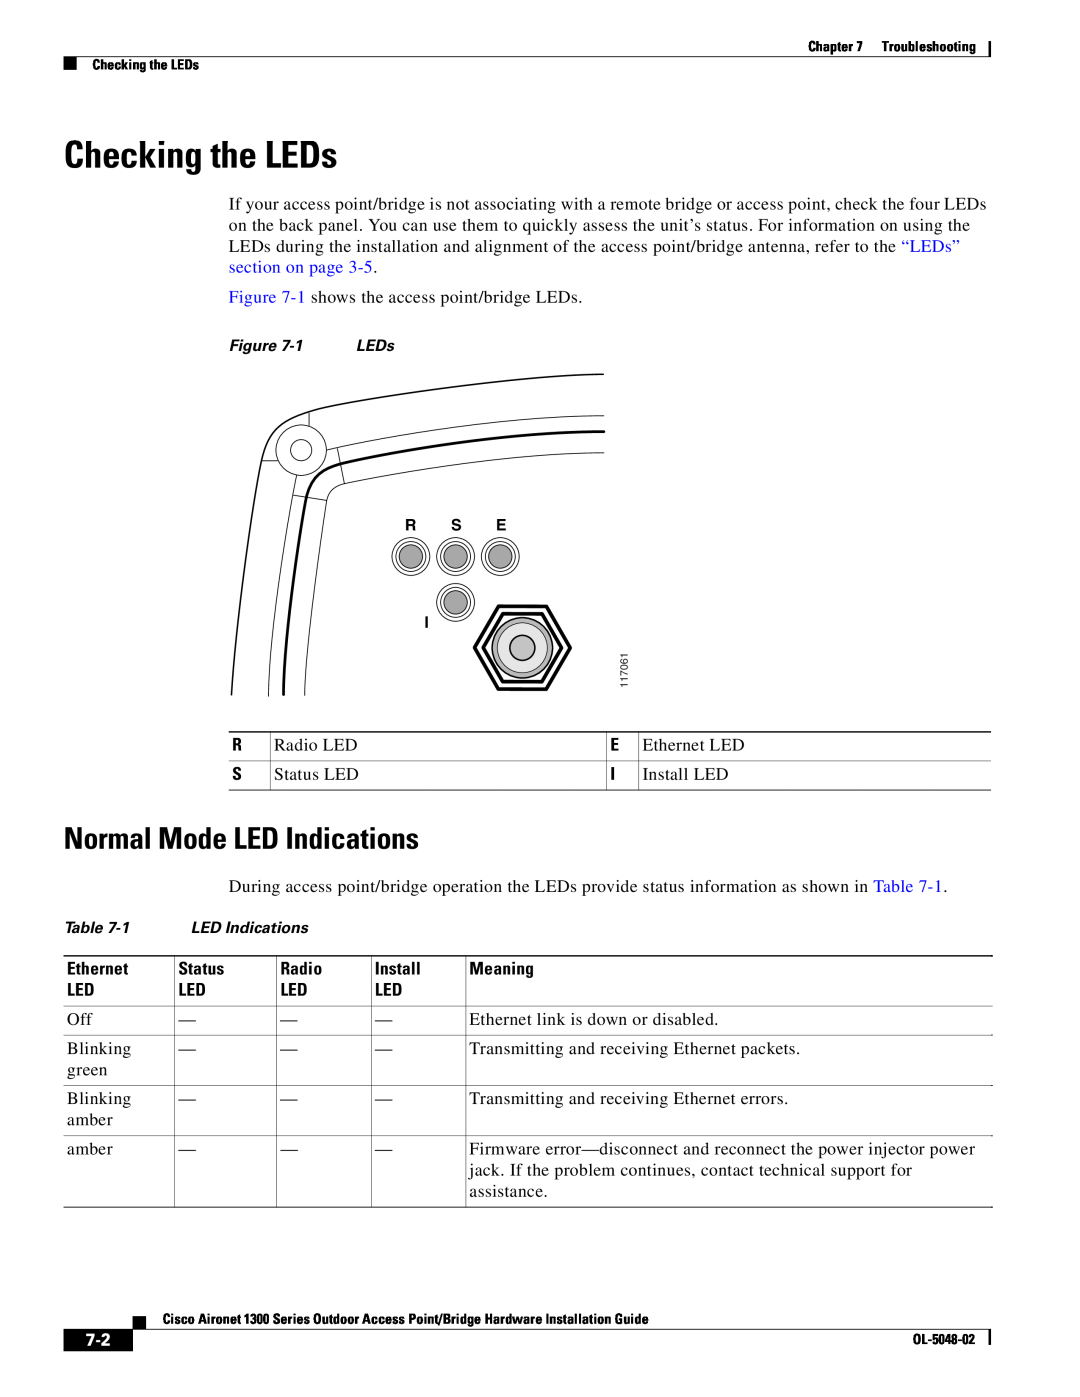 Cisco Systems 1300 Series manual Checking the LEDs, Normal Mode LED Indications 